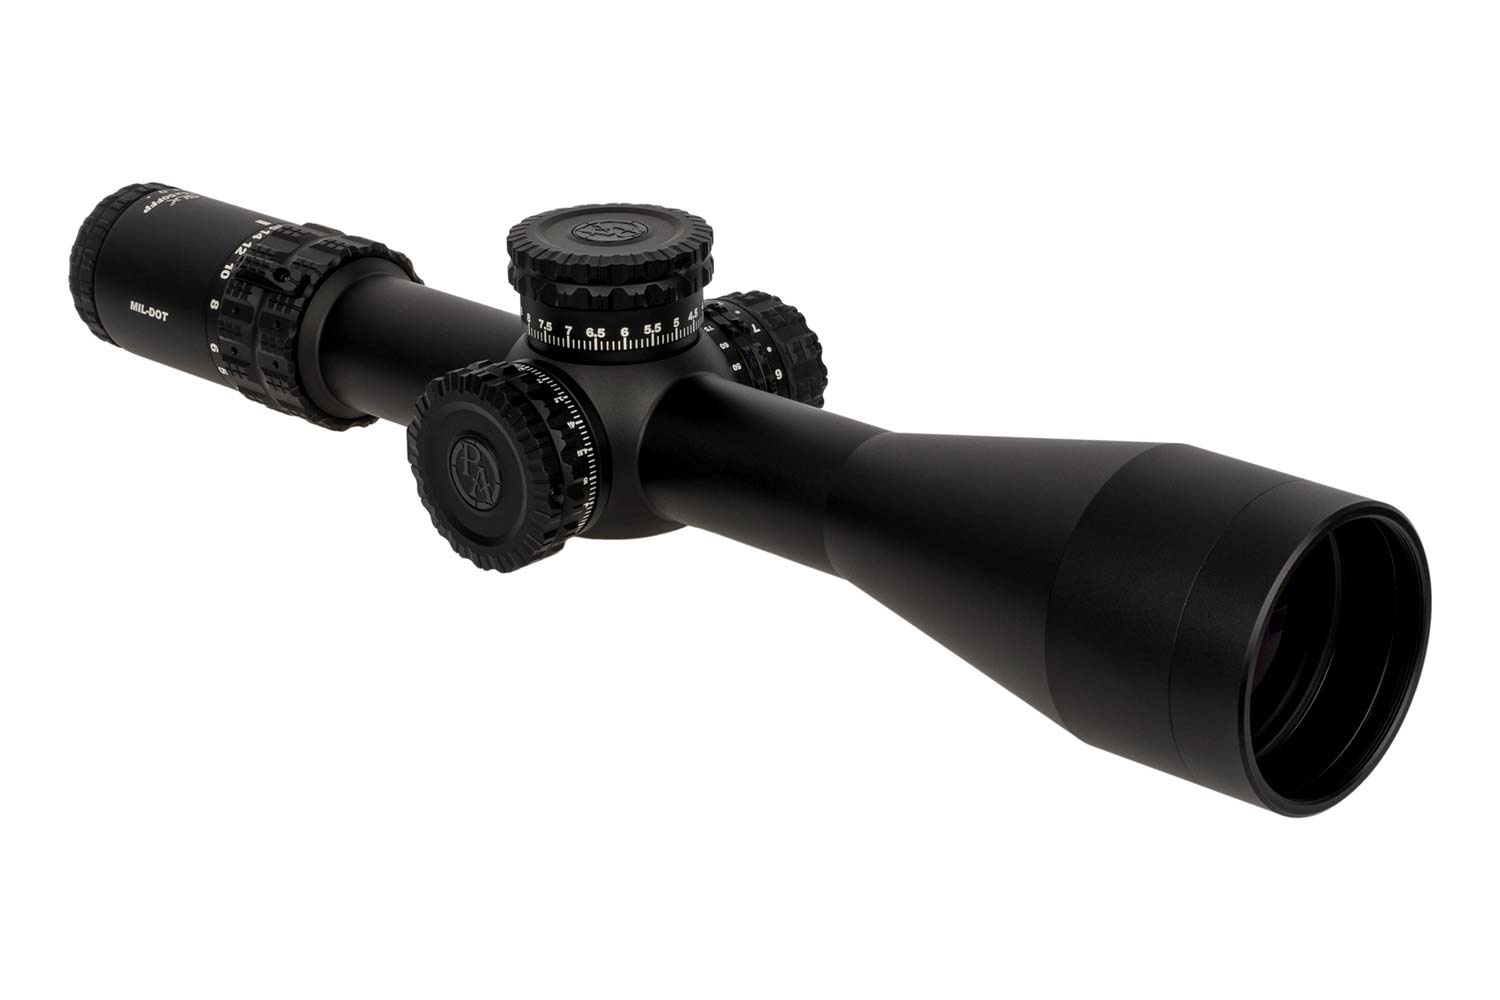 Primary Arms GLx 4-16x50 riflescope on a white background.